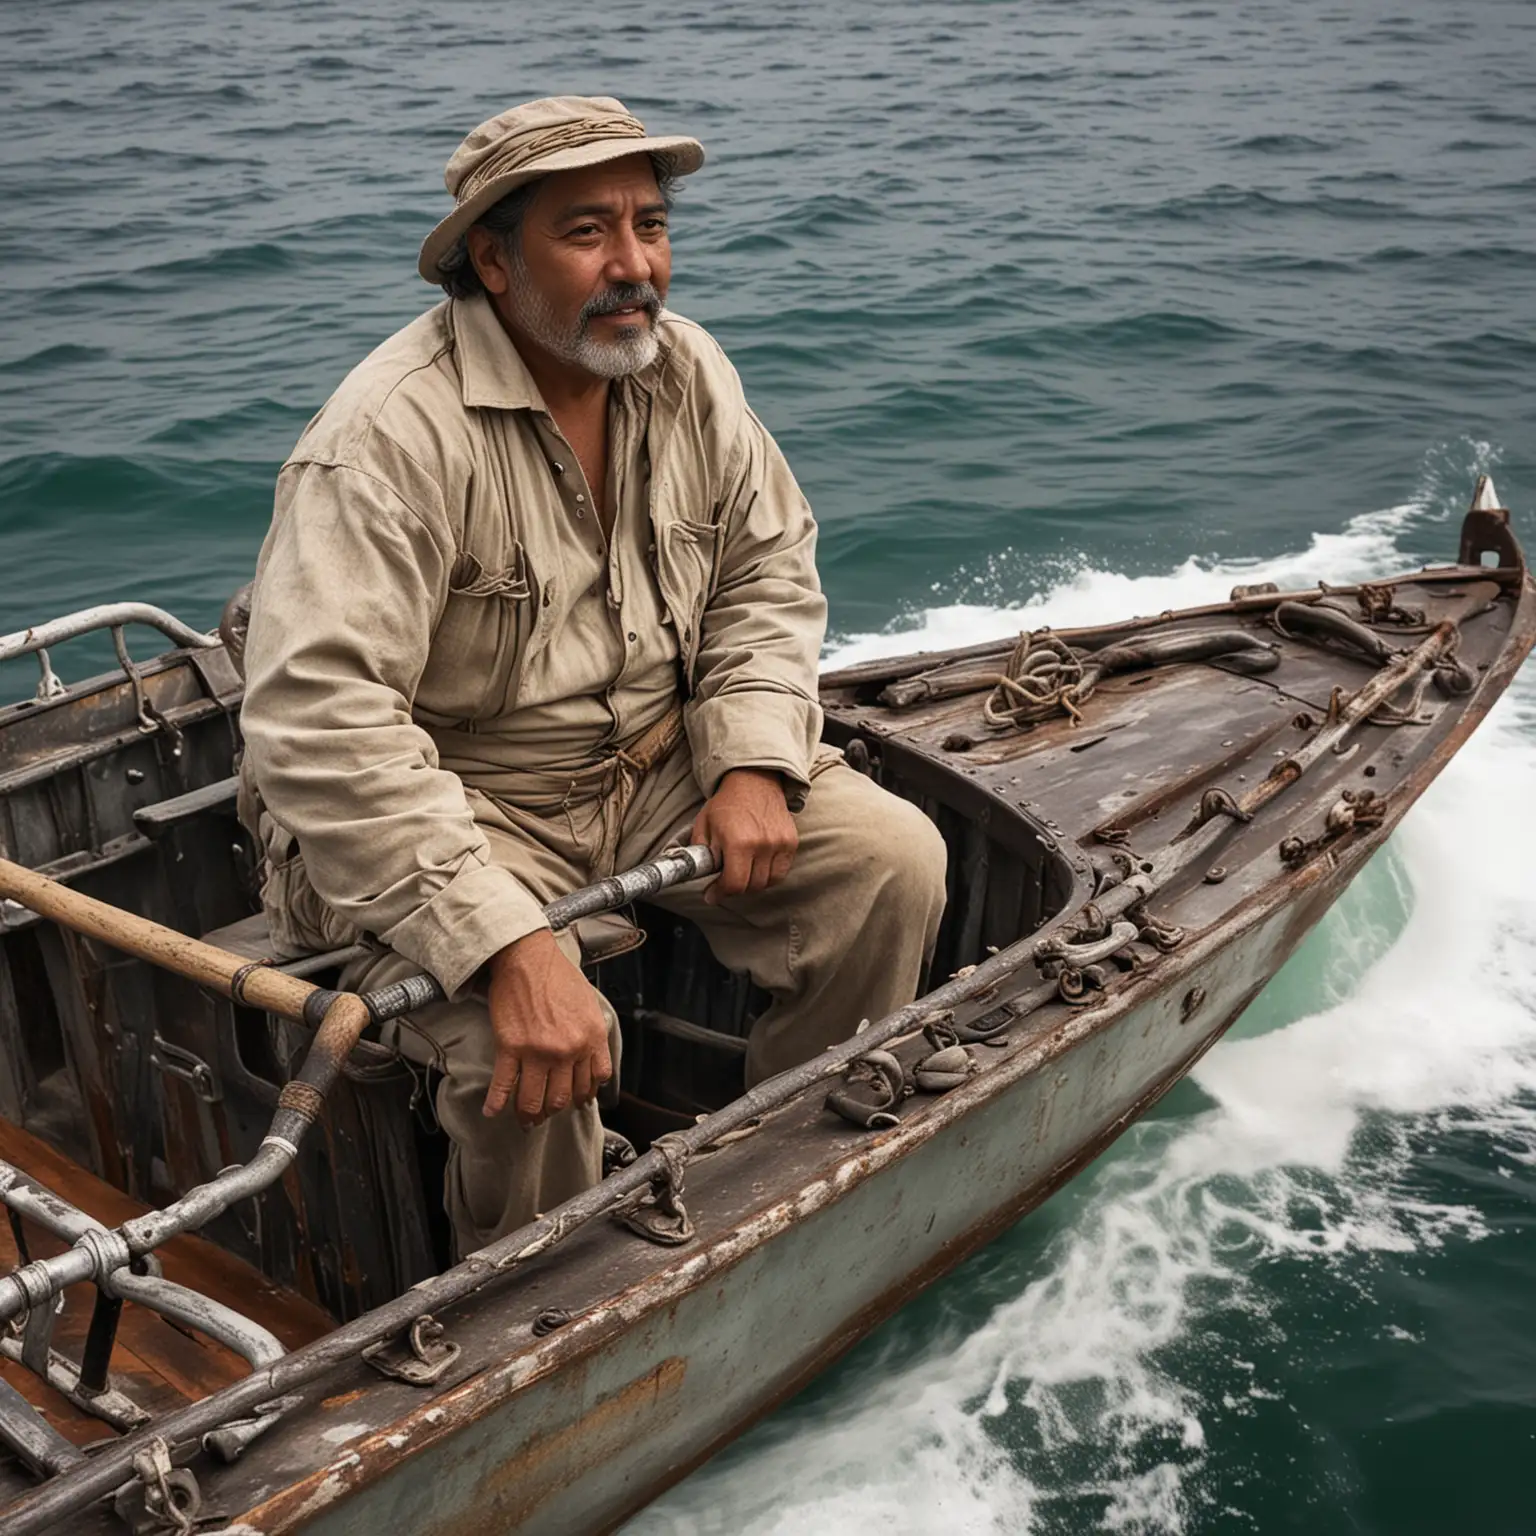 Middleaged Hispanic Man Driving Old Speed Boat on Ocean